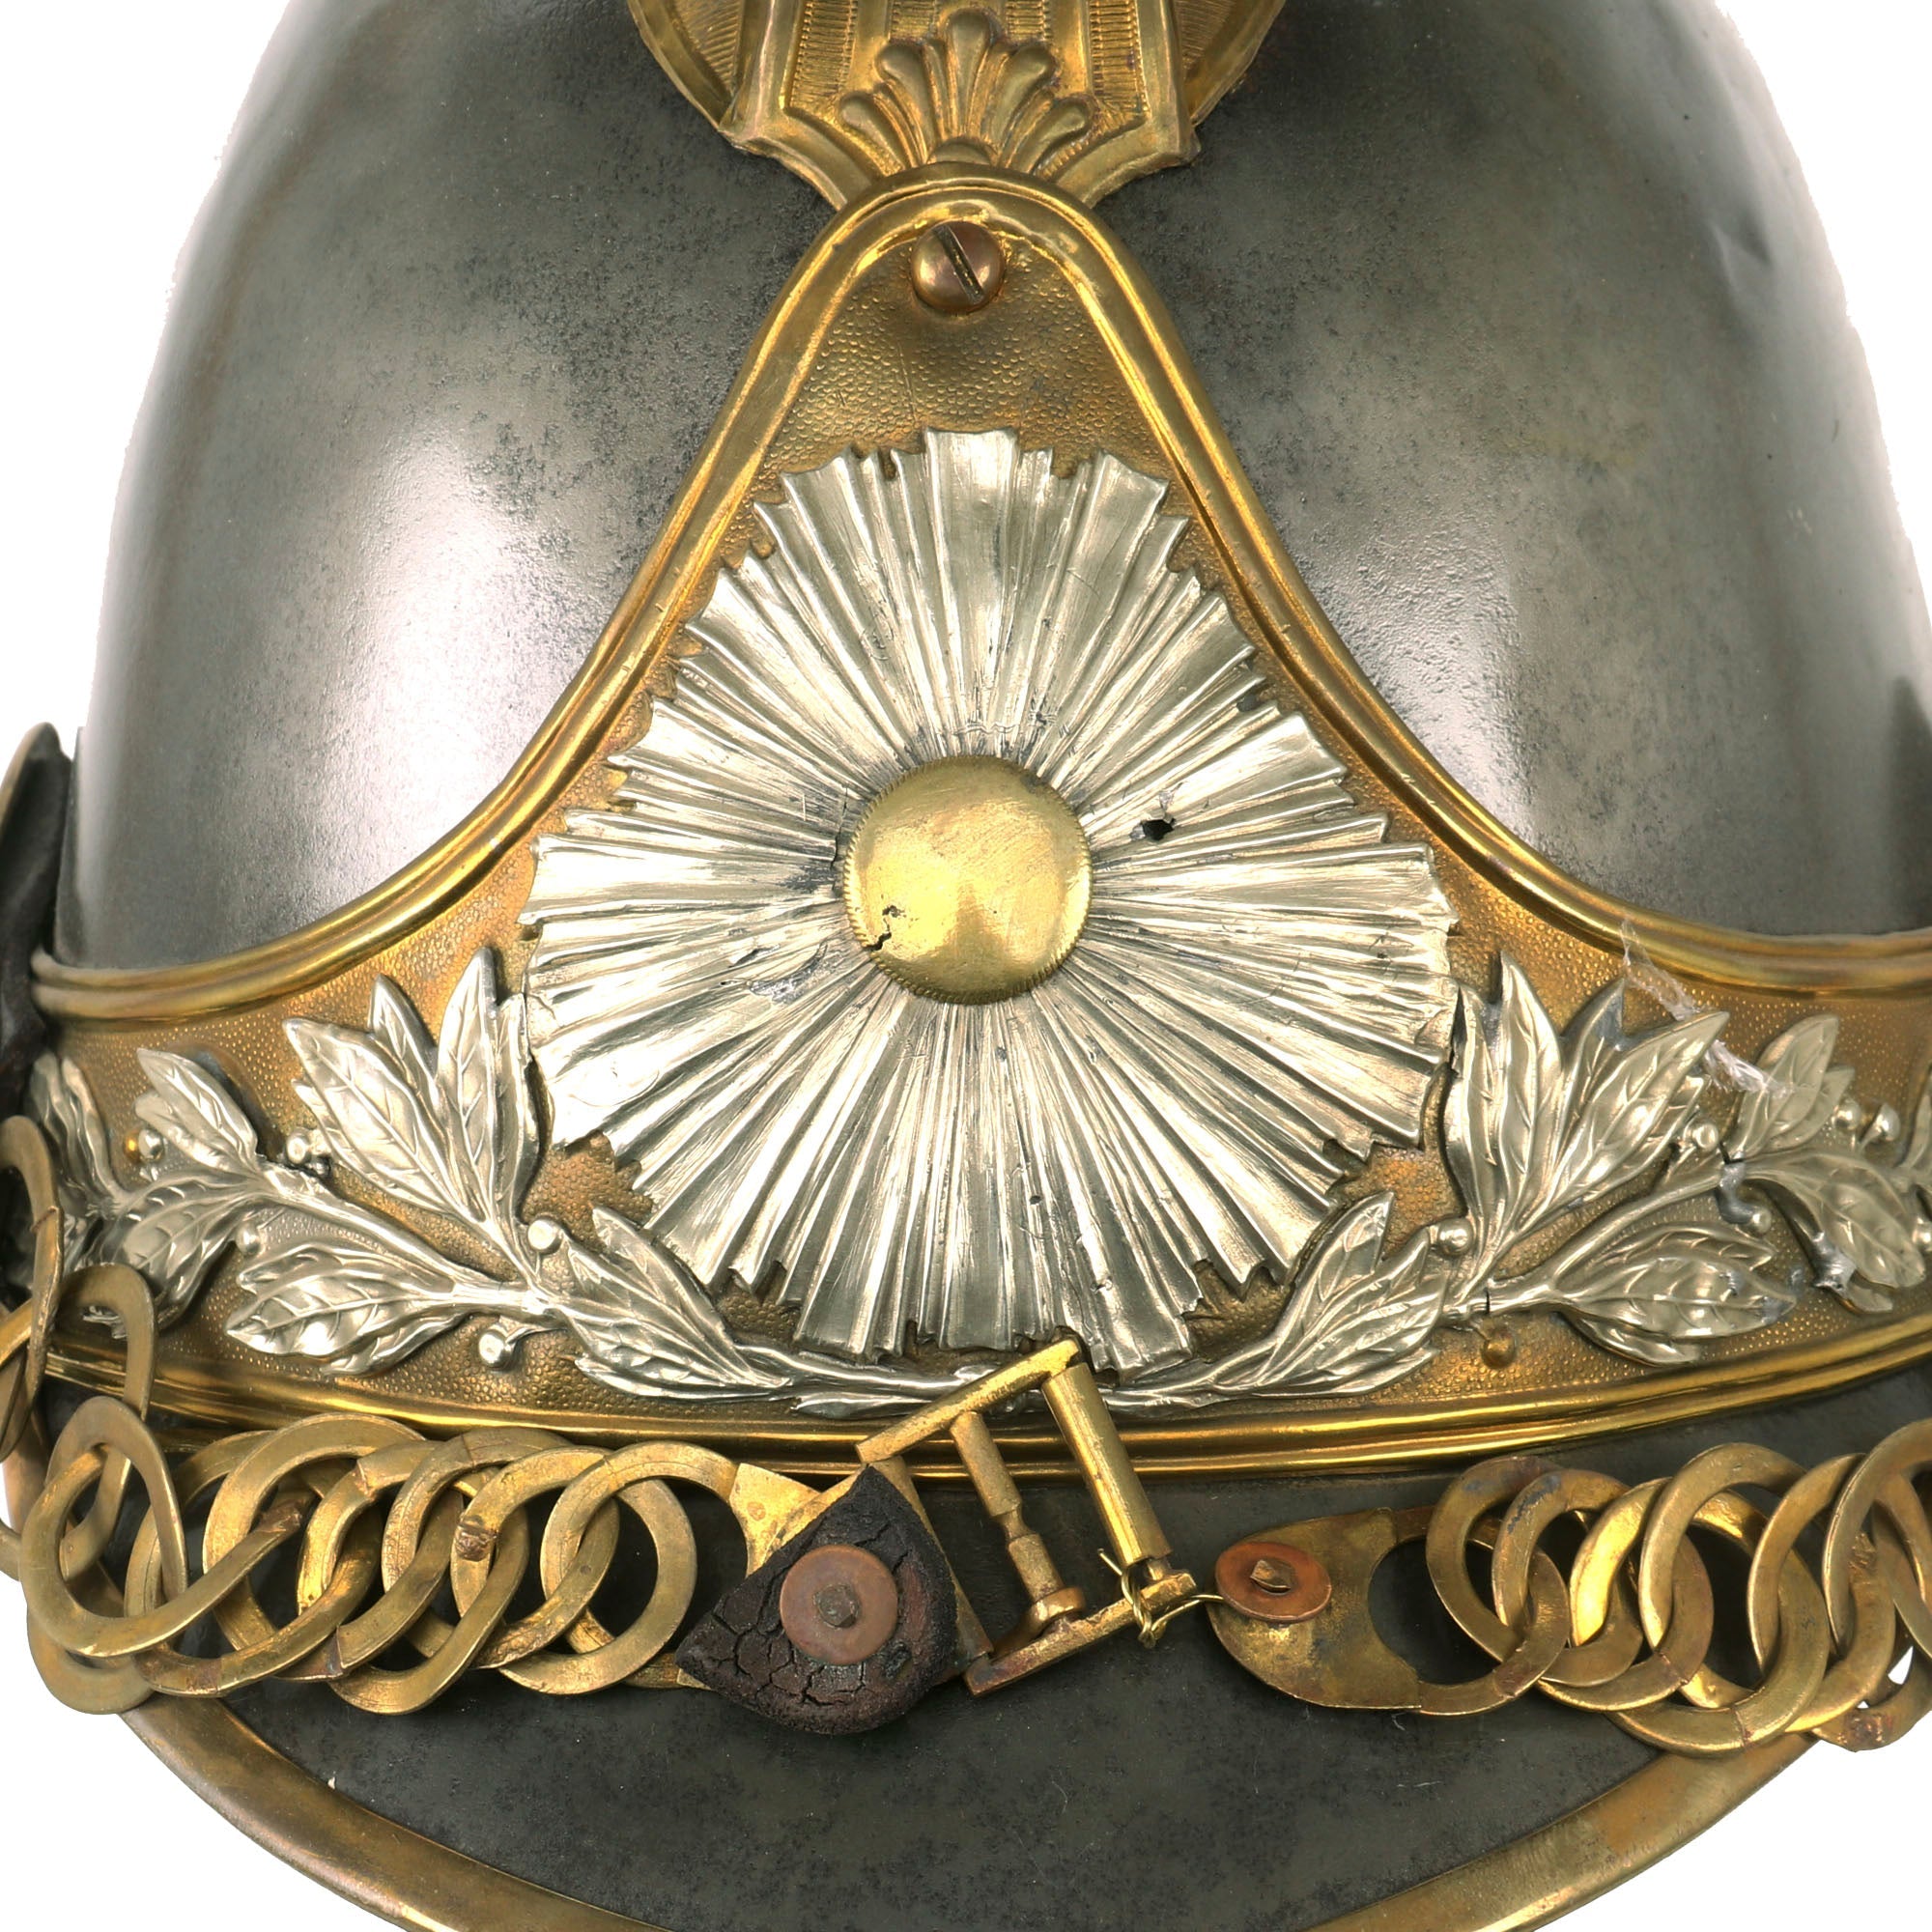 French Military Steel and Brass Armor, Late 18th-Early 19th